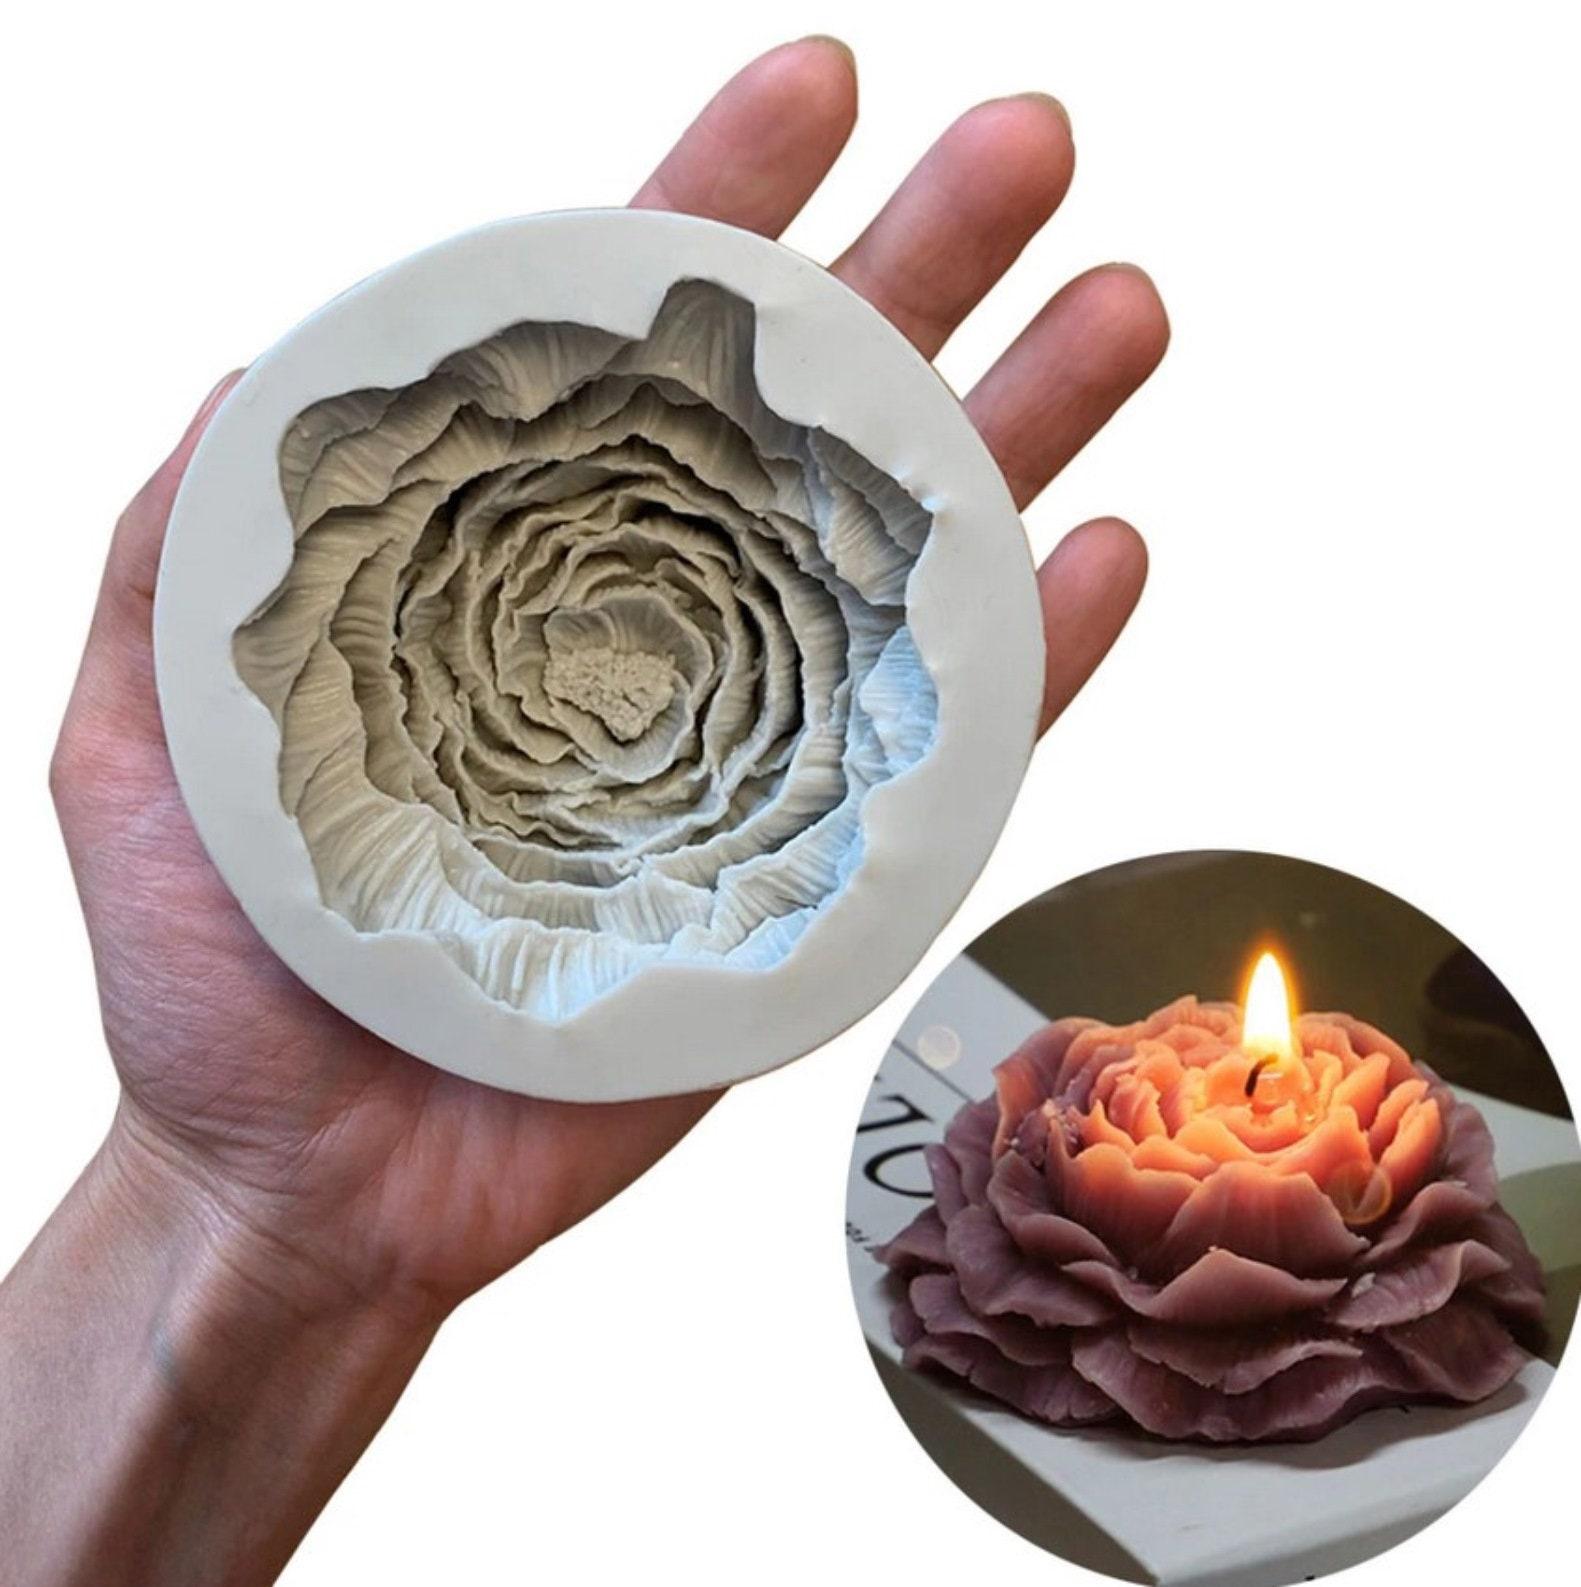 Peony - Casting Molds - Large Flower - Candle Mold, Soap Mold or for Clay, Casting and Baking